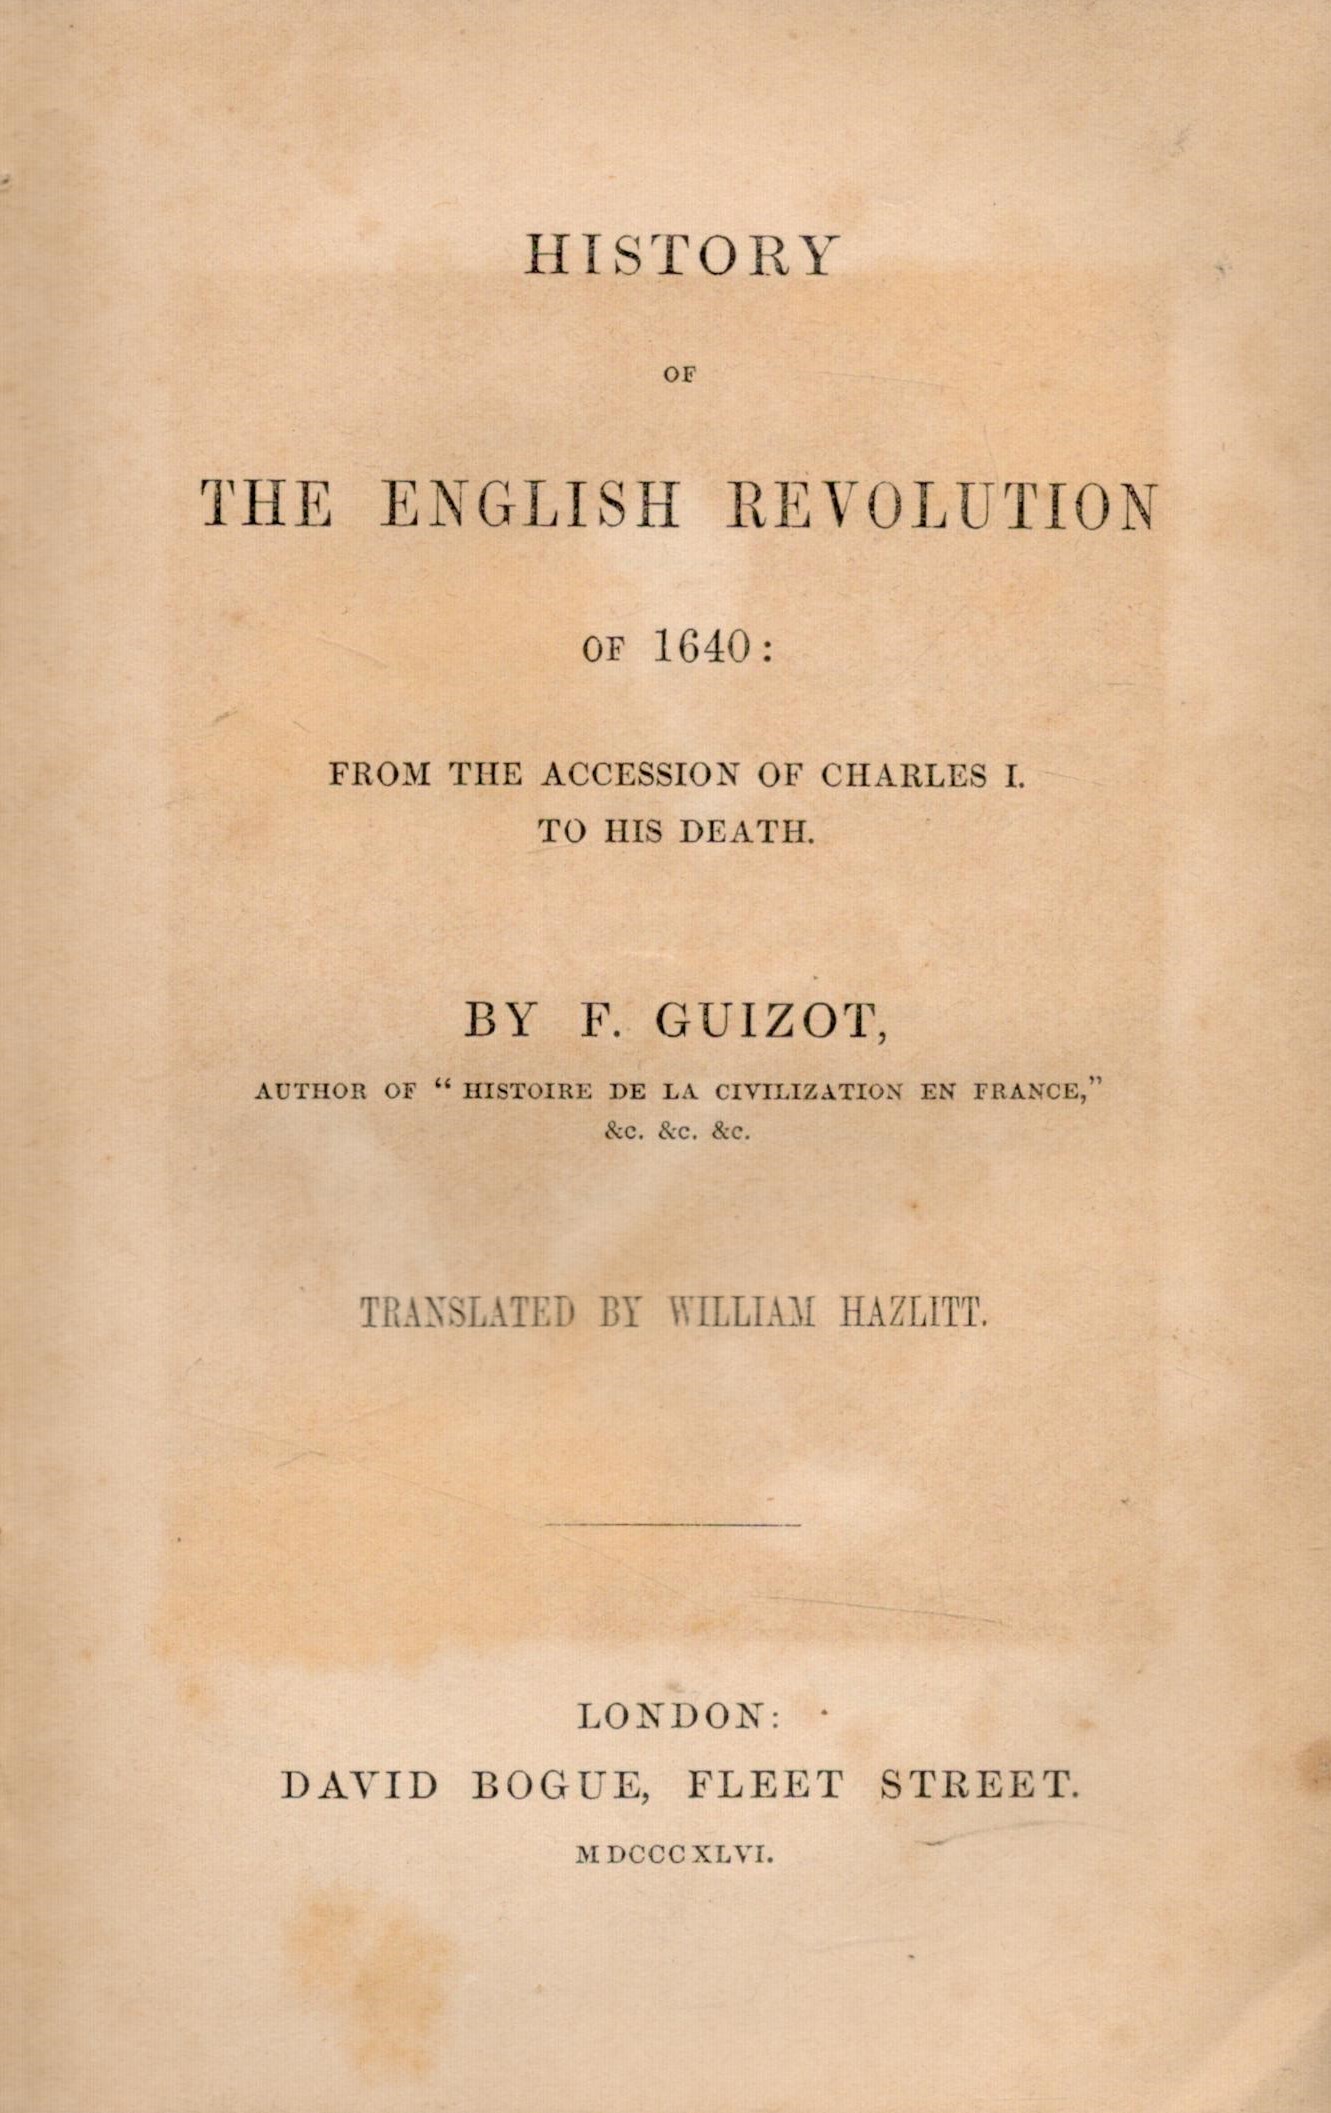 F. Guizot History of English Revolution of 1640: from the accession of Charles I to his death. - Image 2 of 2